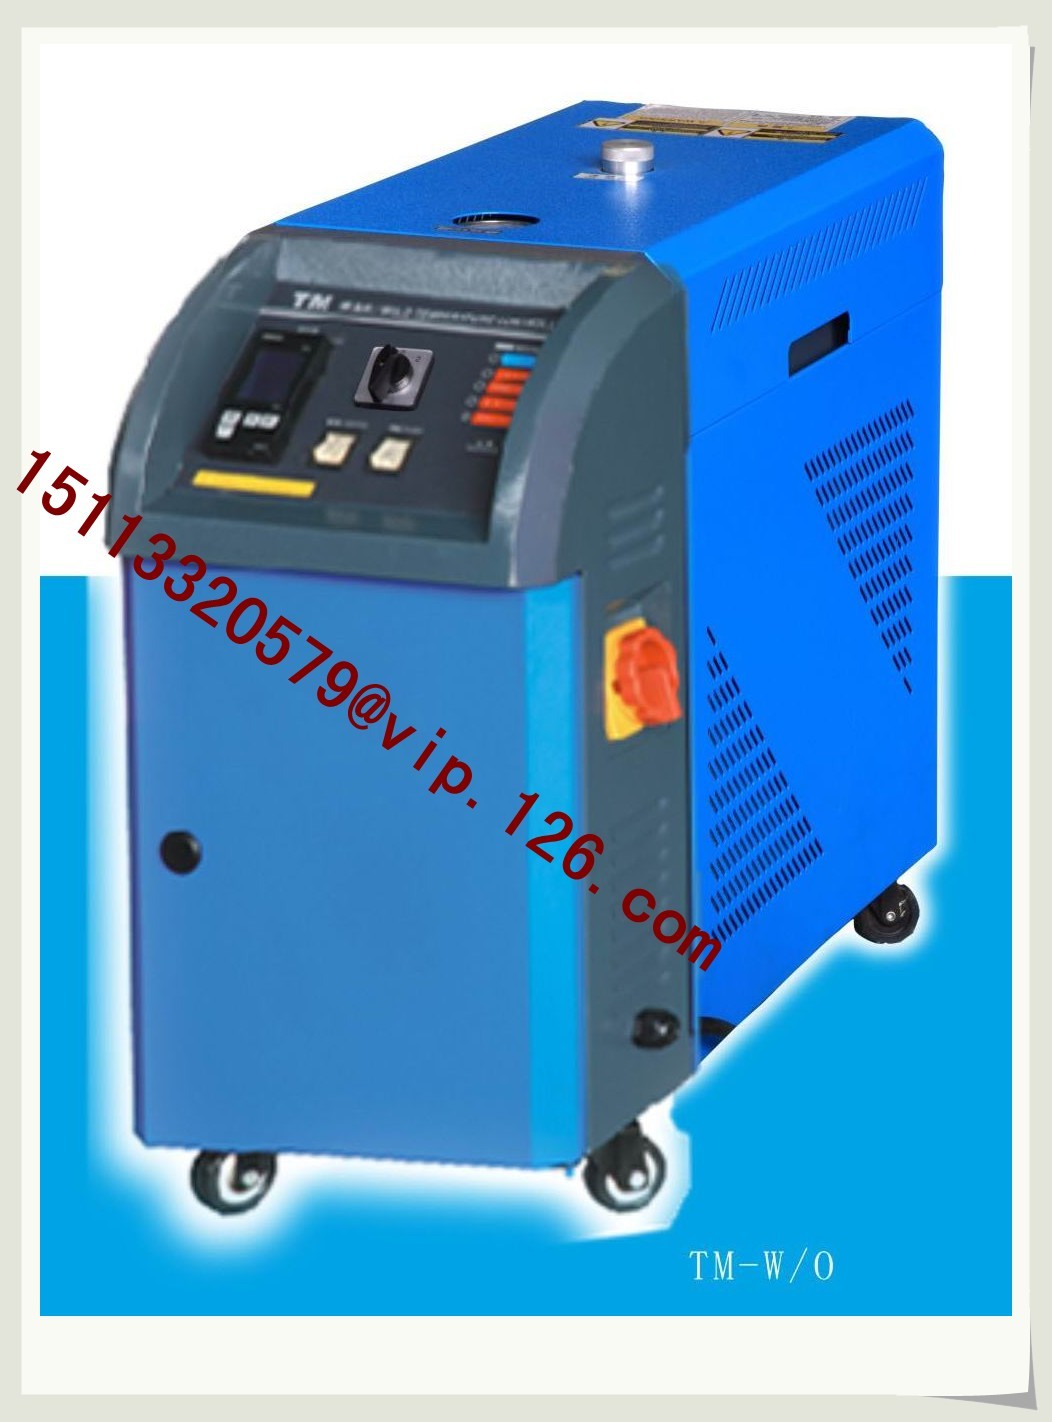 Oil Heating Mold Temperature Controller with CE and ISO